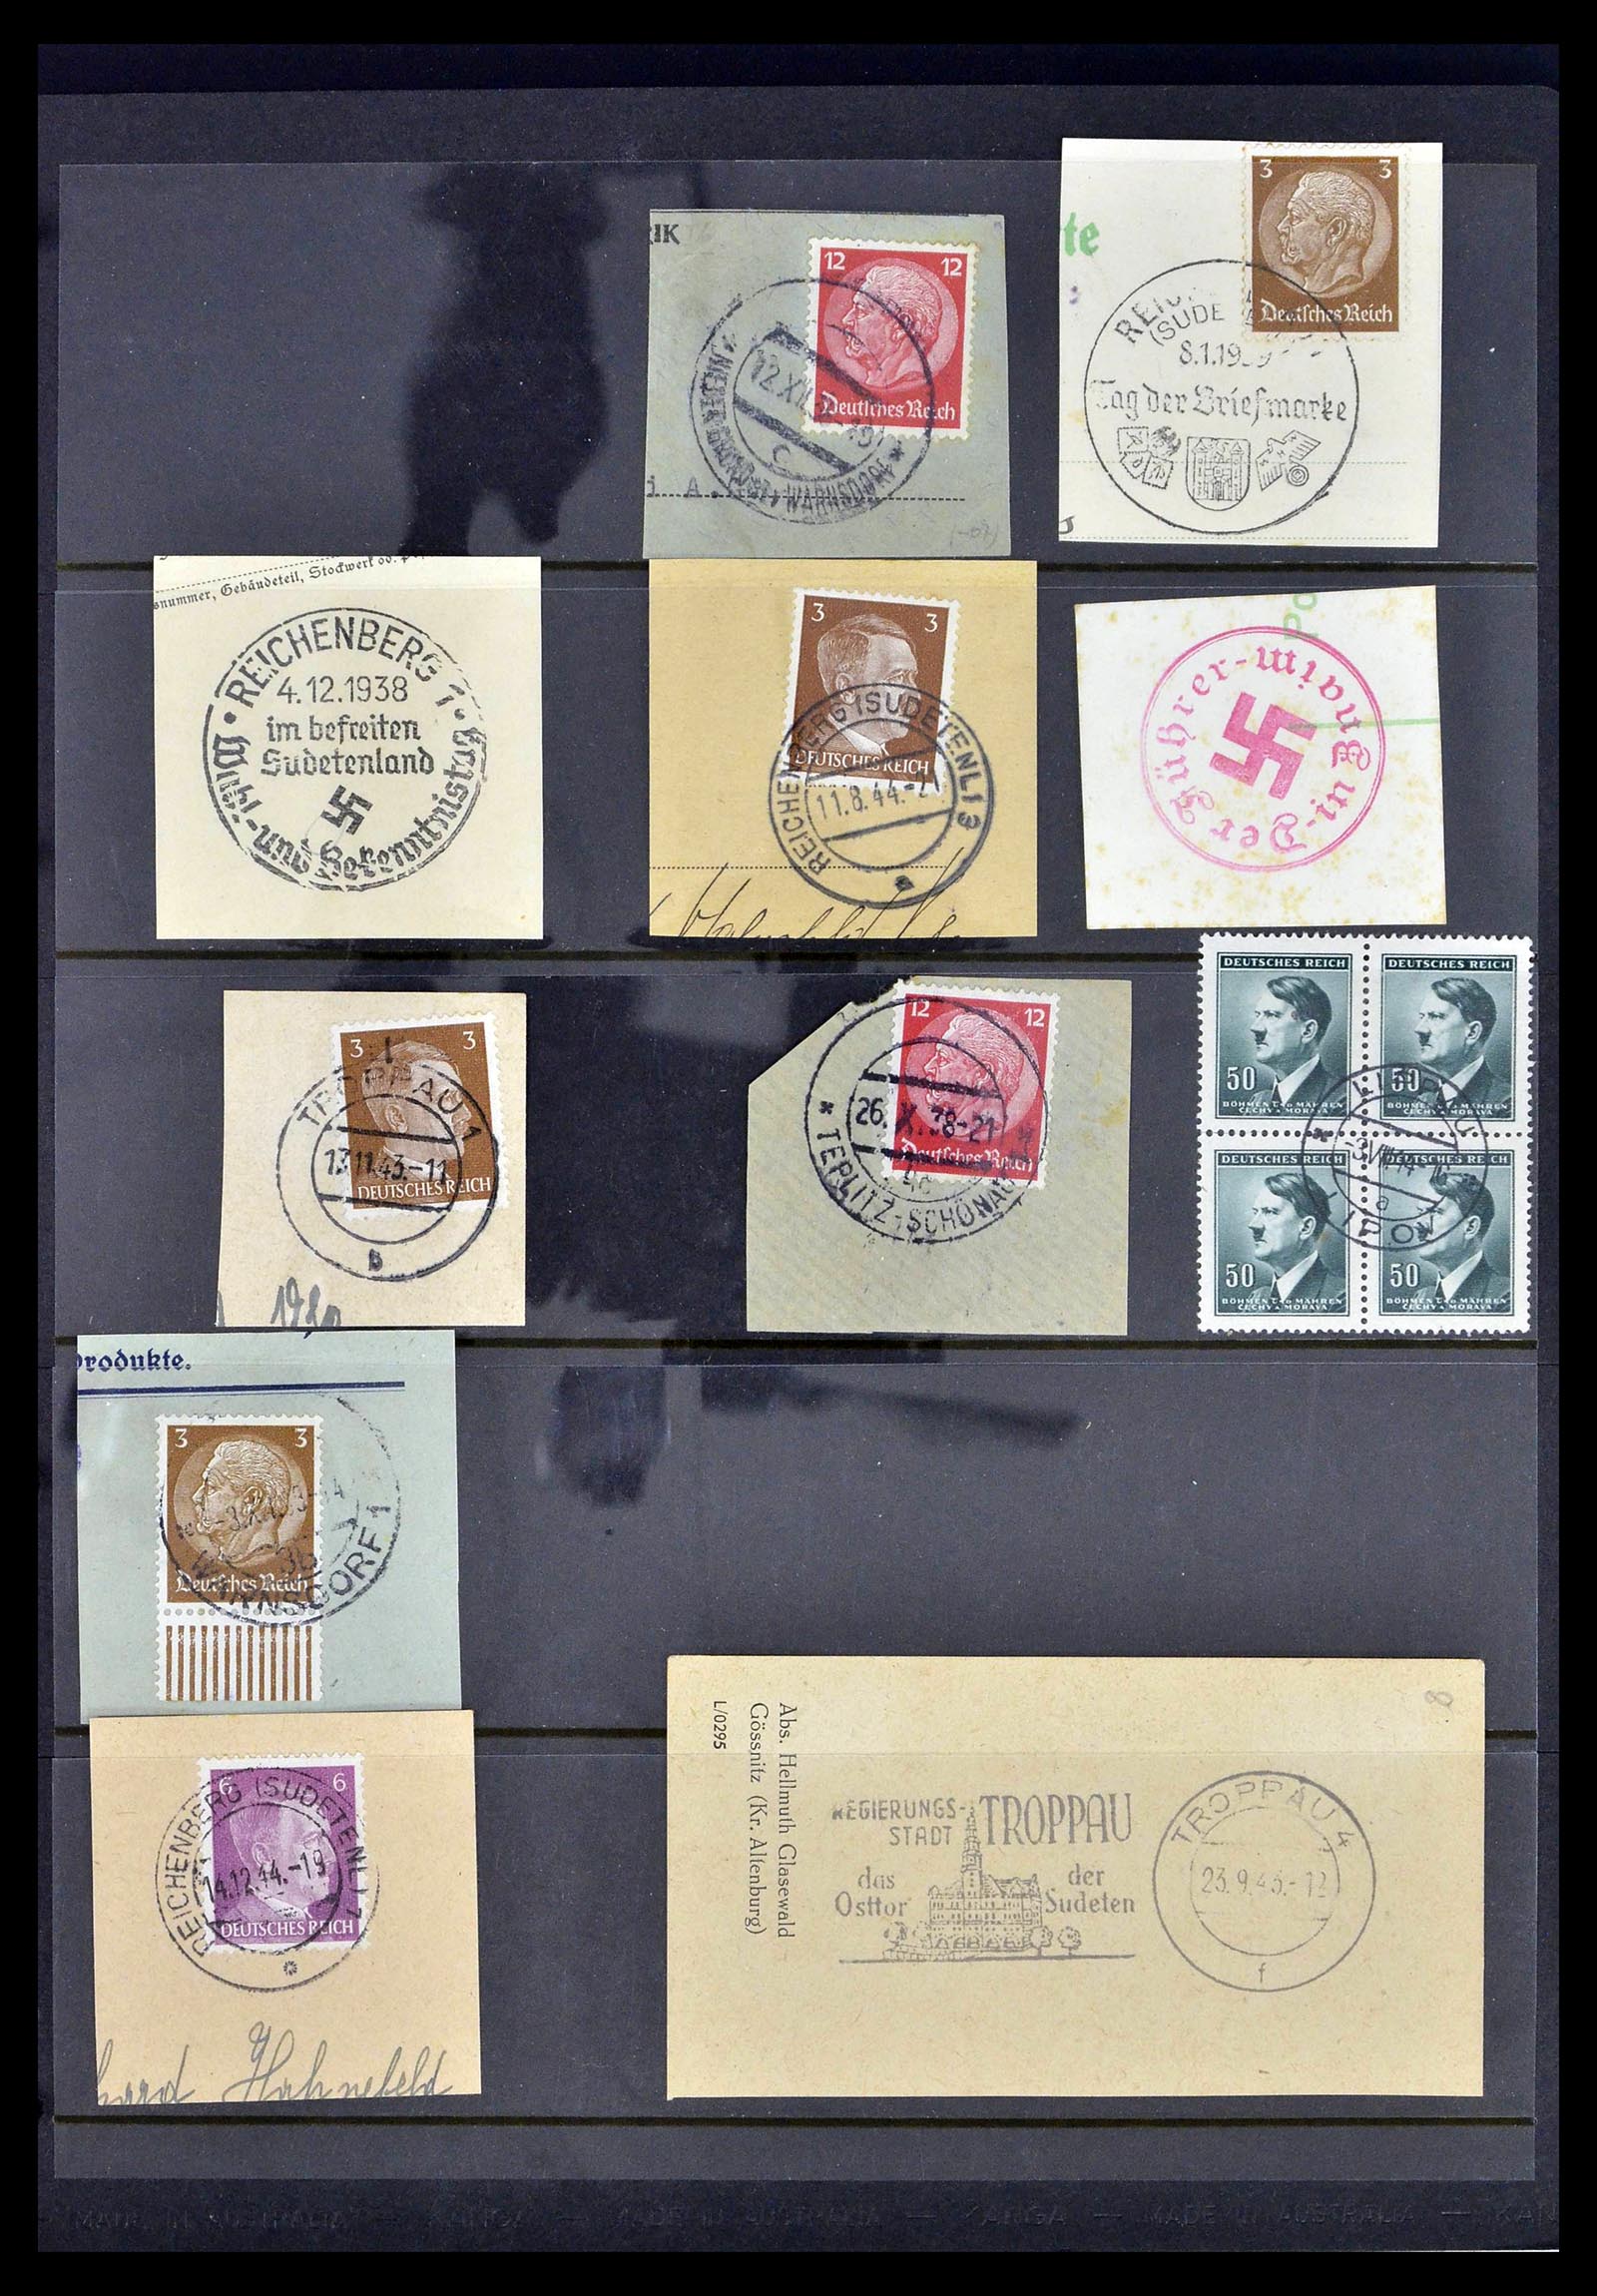 39396 0045 - Stamp collection 39396 German occupation WW II 1939-1945.